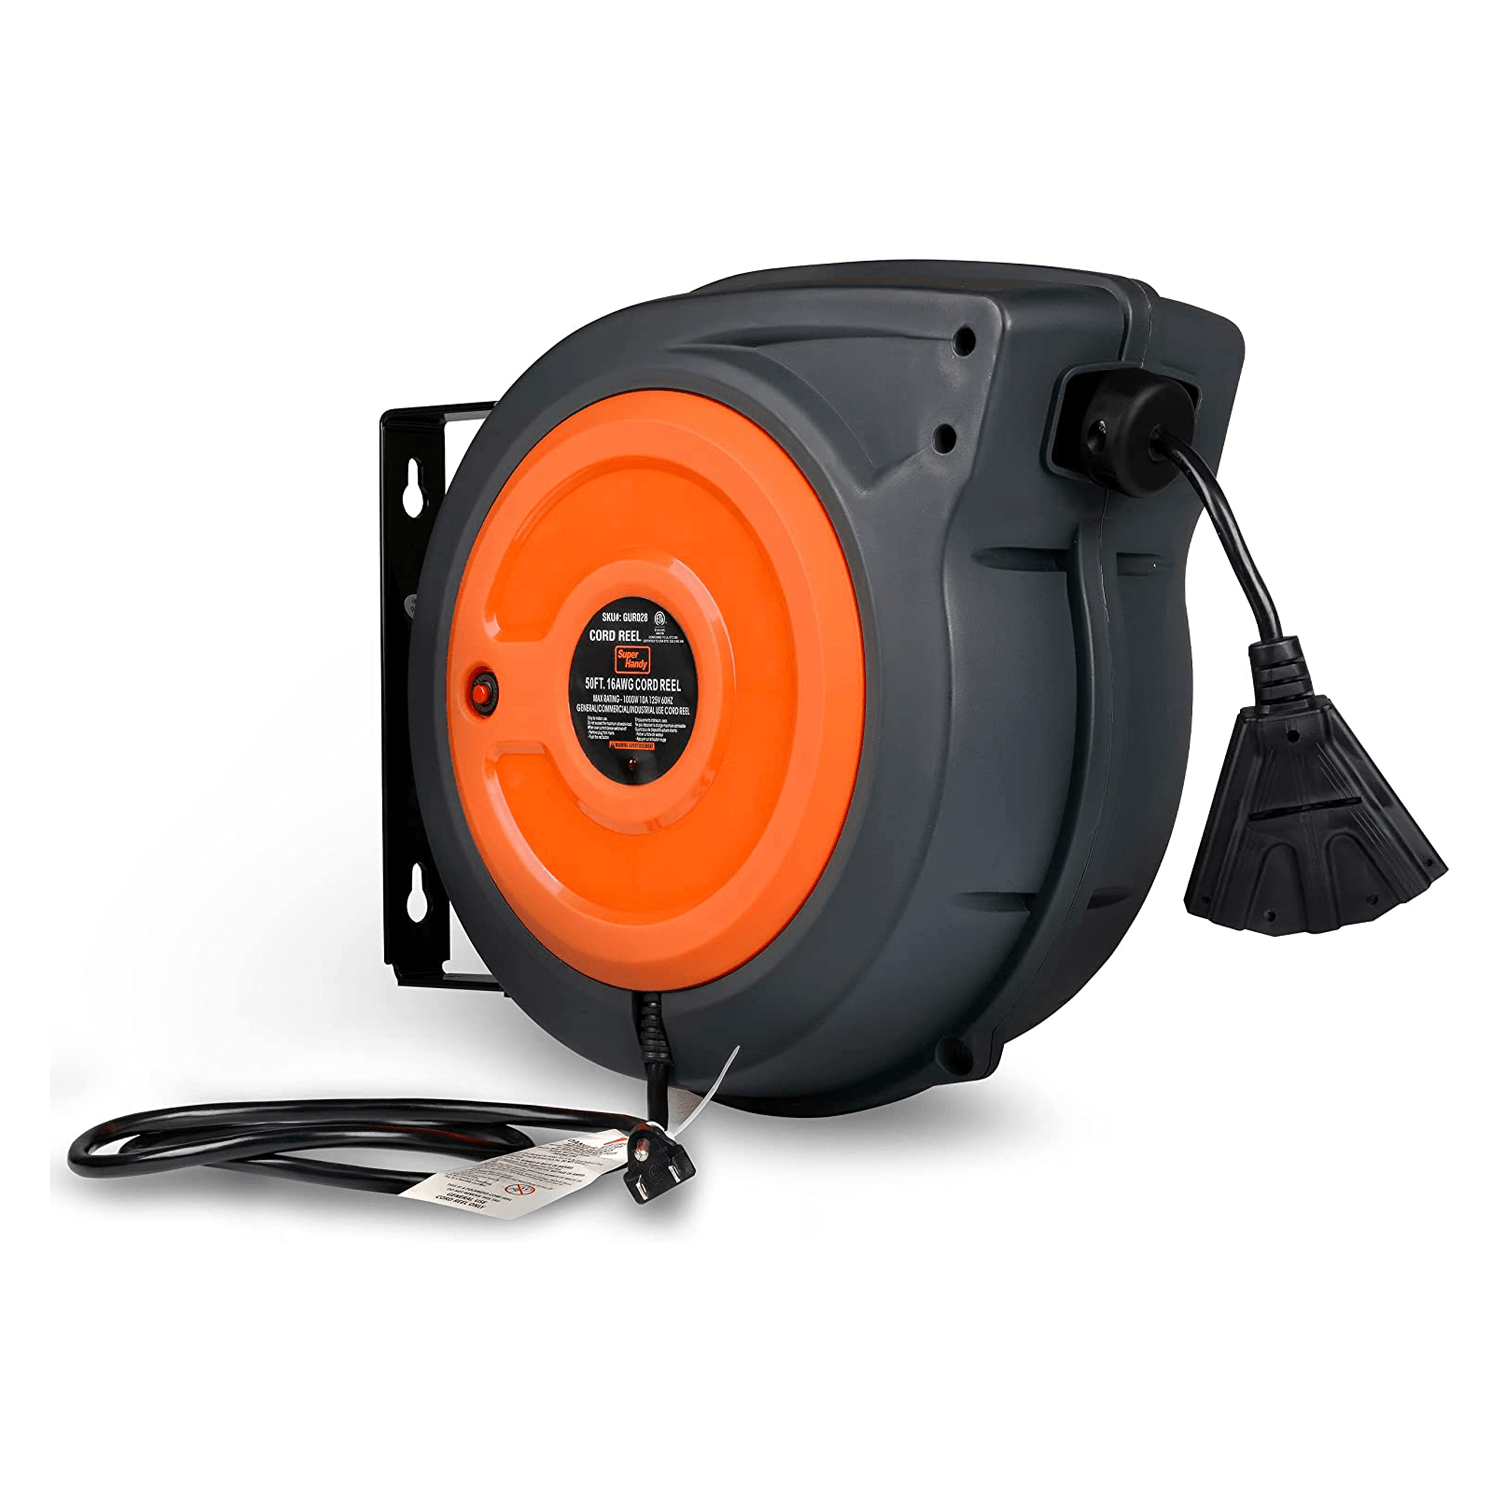 SuperHandy Mountable Retractable Extension Cord Reel - 16AWG x 50' Ft, 3 Grounded Outlets, Max 10A - DIY Tools by GreatCircleUS